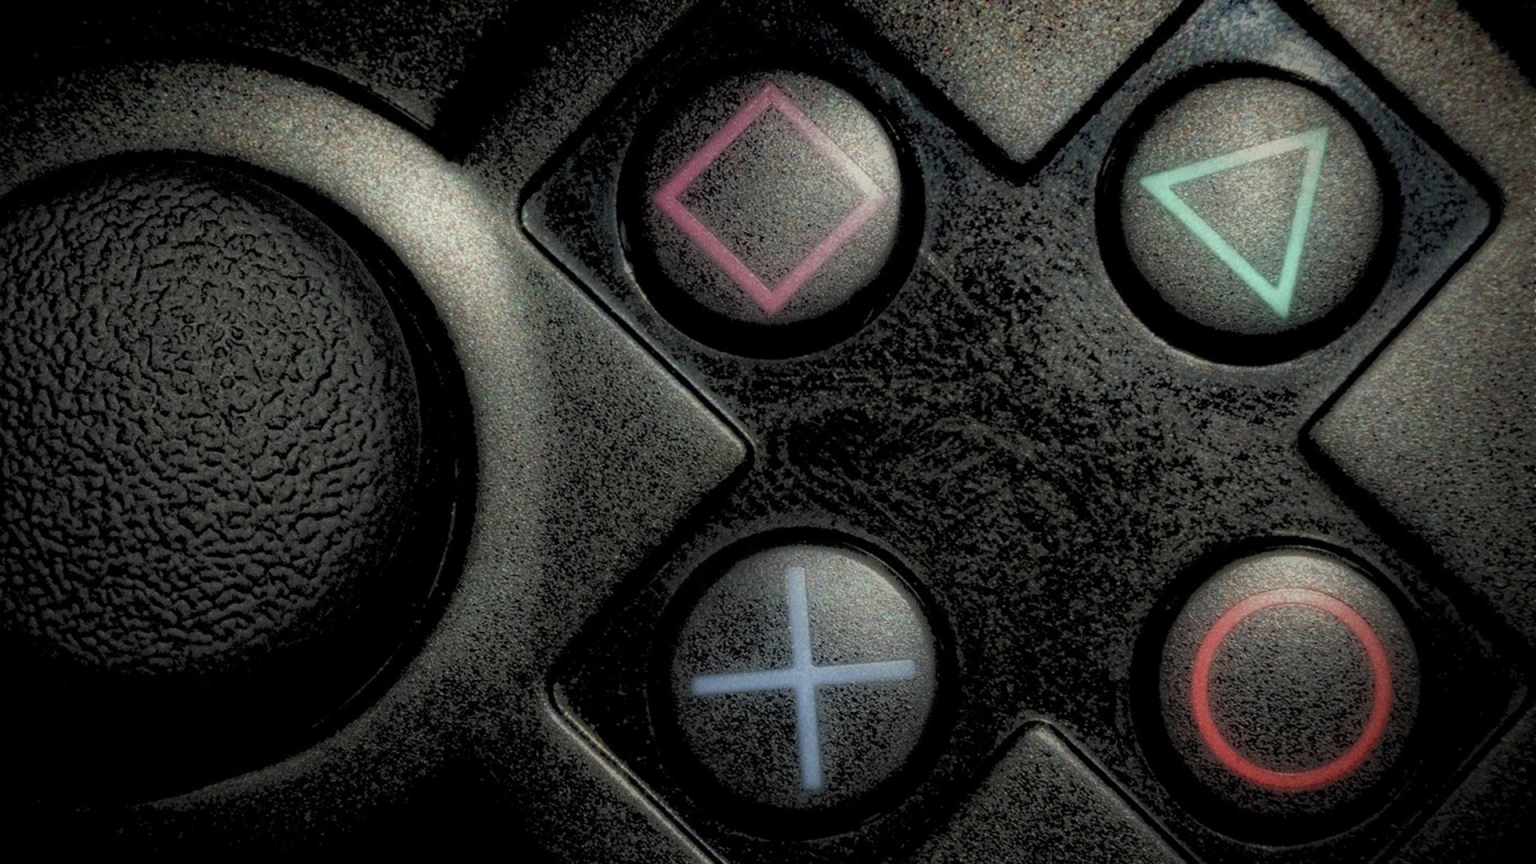 Playstation Buttons for 1536 x 864 HDTV resolution